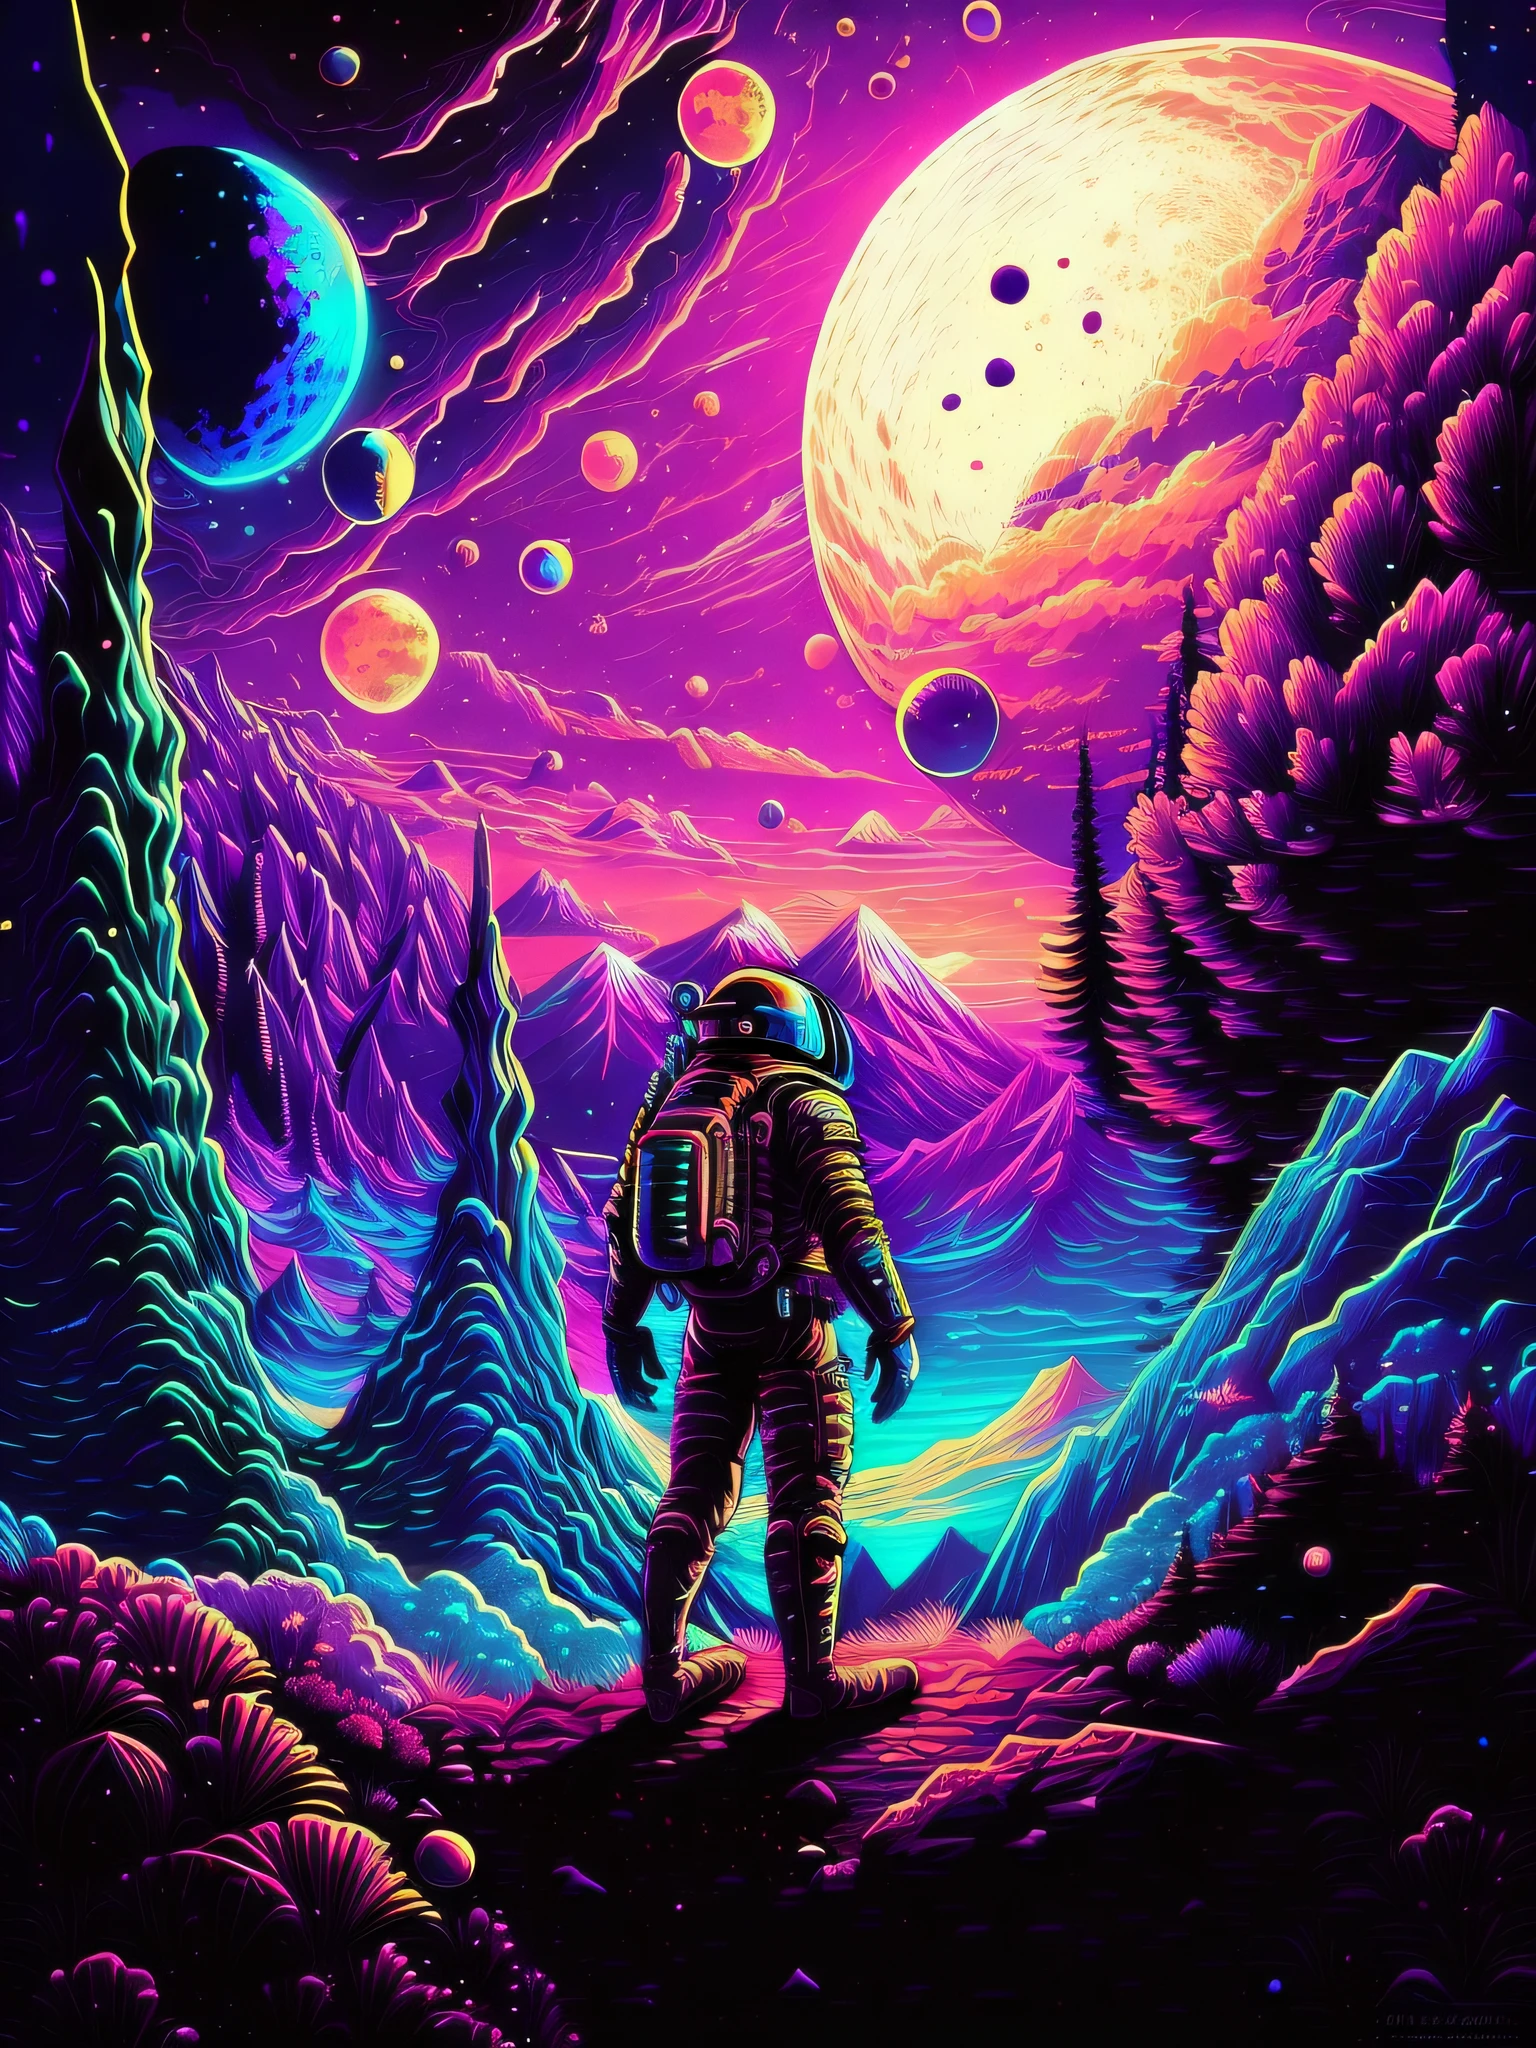 A man in a spacesuit stands on a mountain looking at the planets, in an colorful alien planet, inspired by Dan Mumford, Dan Mumford's art style, in the style dan mumford artwork, space colors, Inspired by Cyril Rolando,  astronaut, standing in outer space, Space landscape, Surreal space, cosmos sem fim no fundo, on another planet